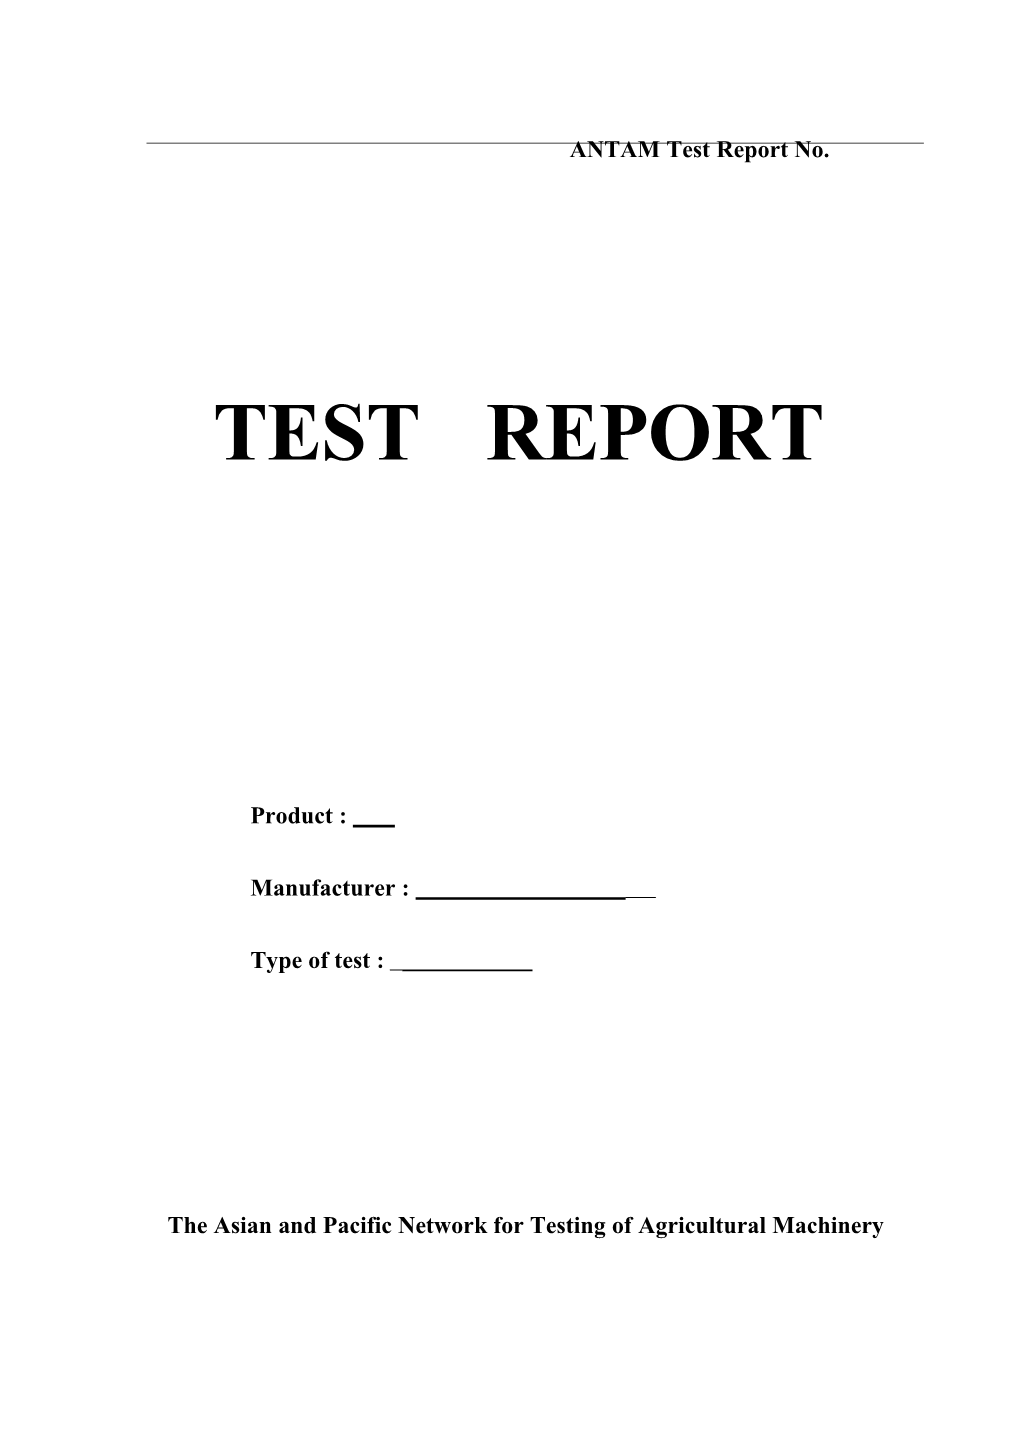 1. This Report Is Invalid Without the Official Logo of ANTAM